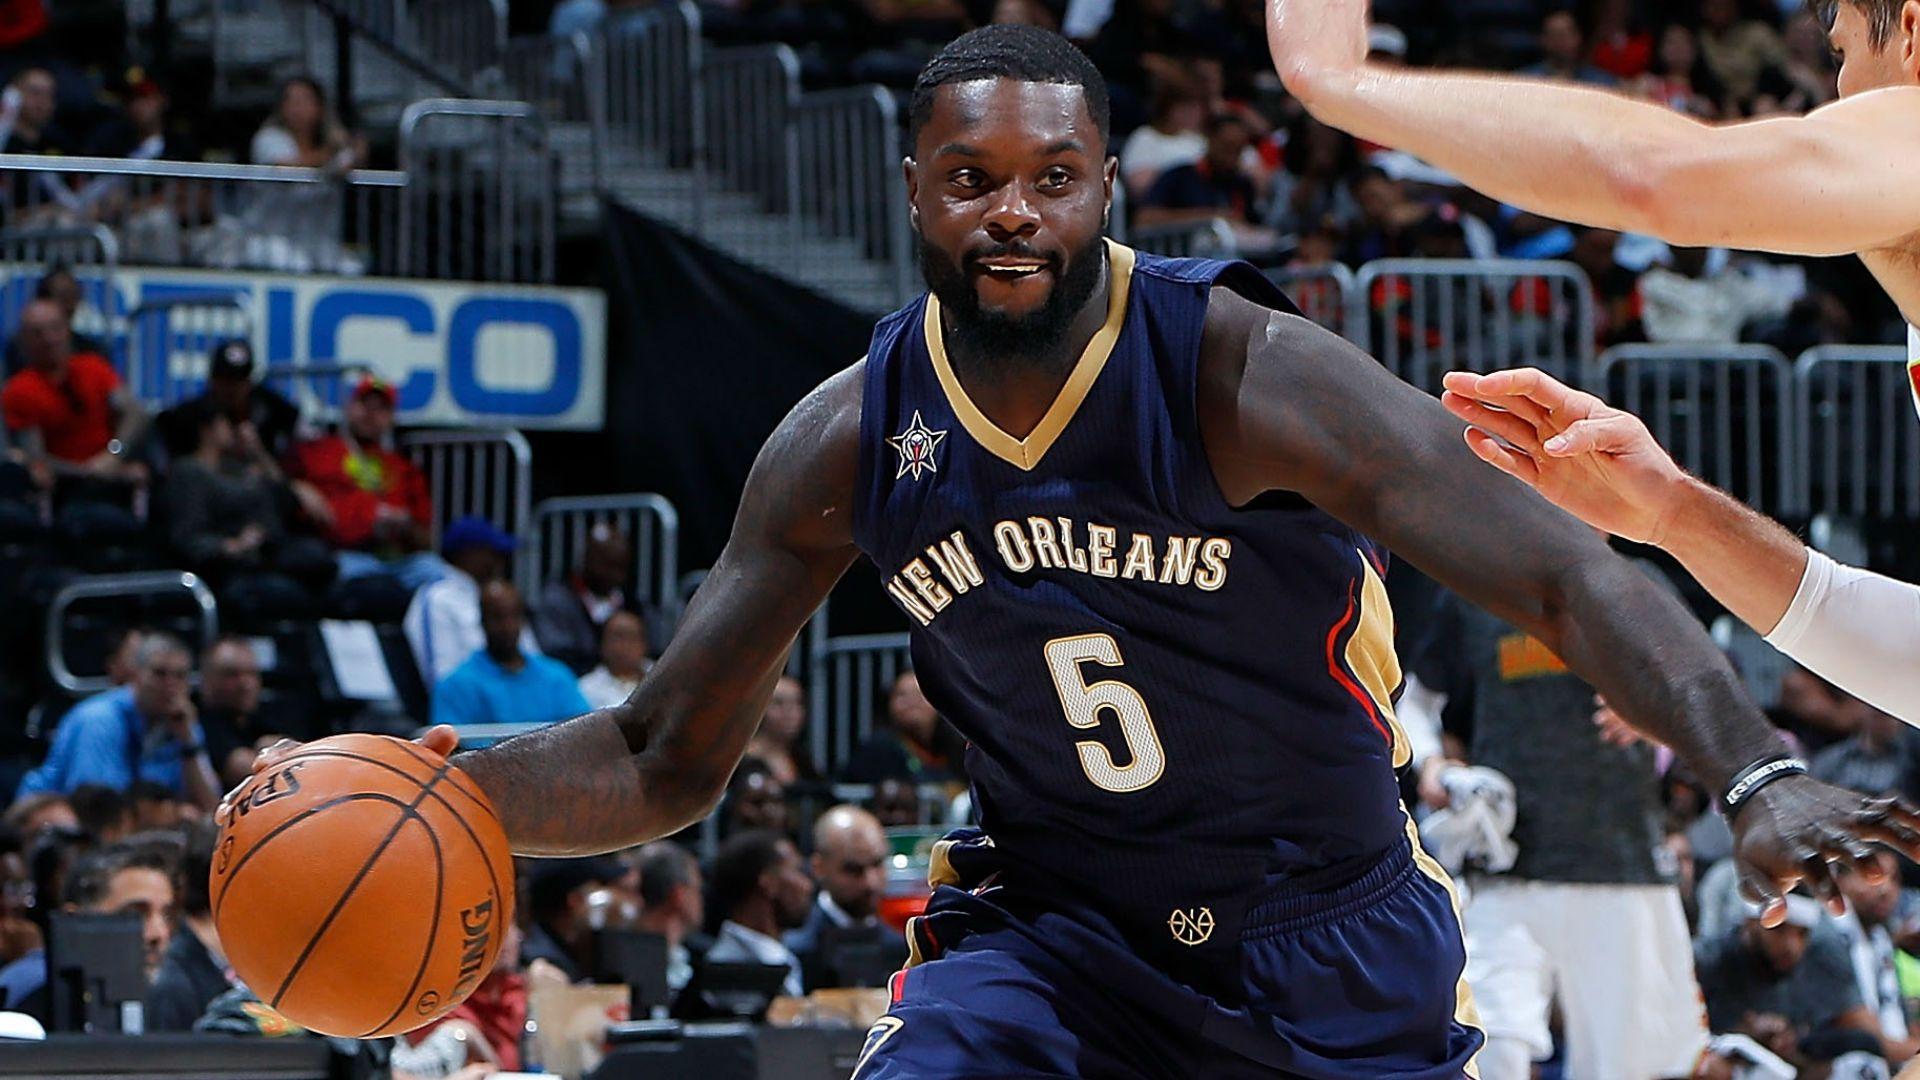 Lance Stephenson will sign with Timberwolves despite Cavs workout